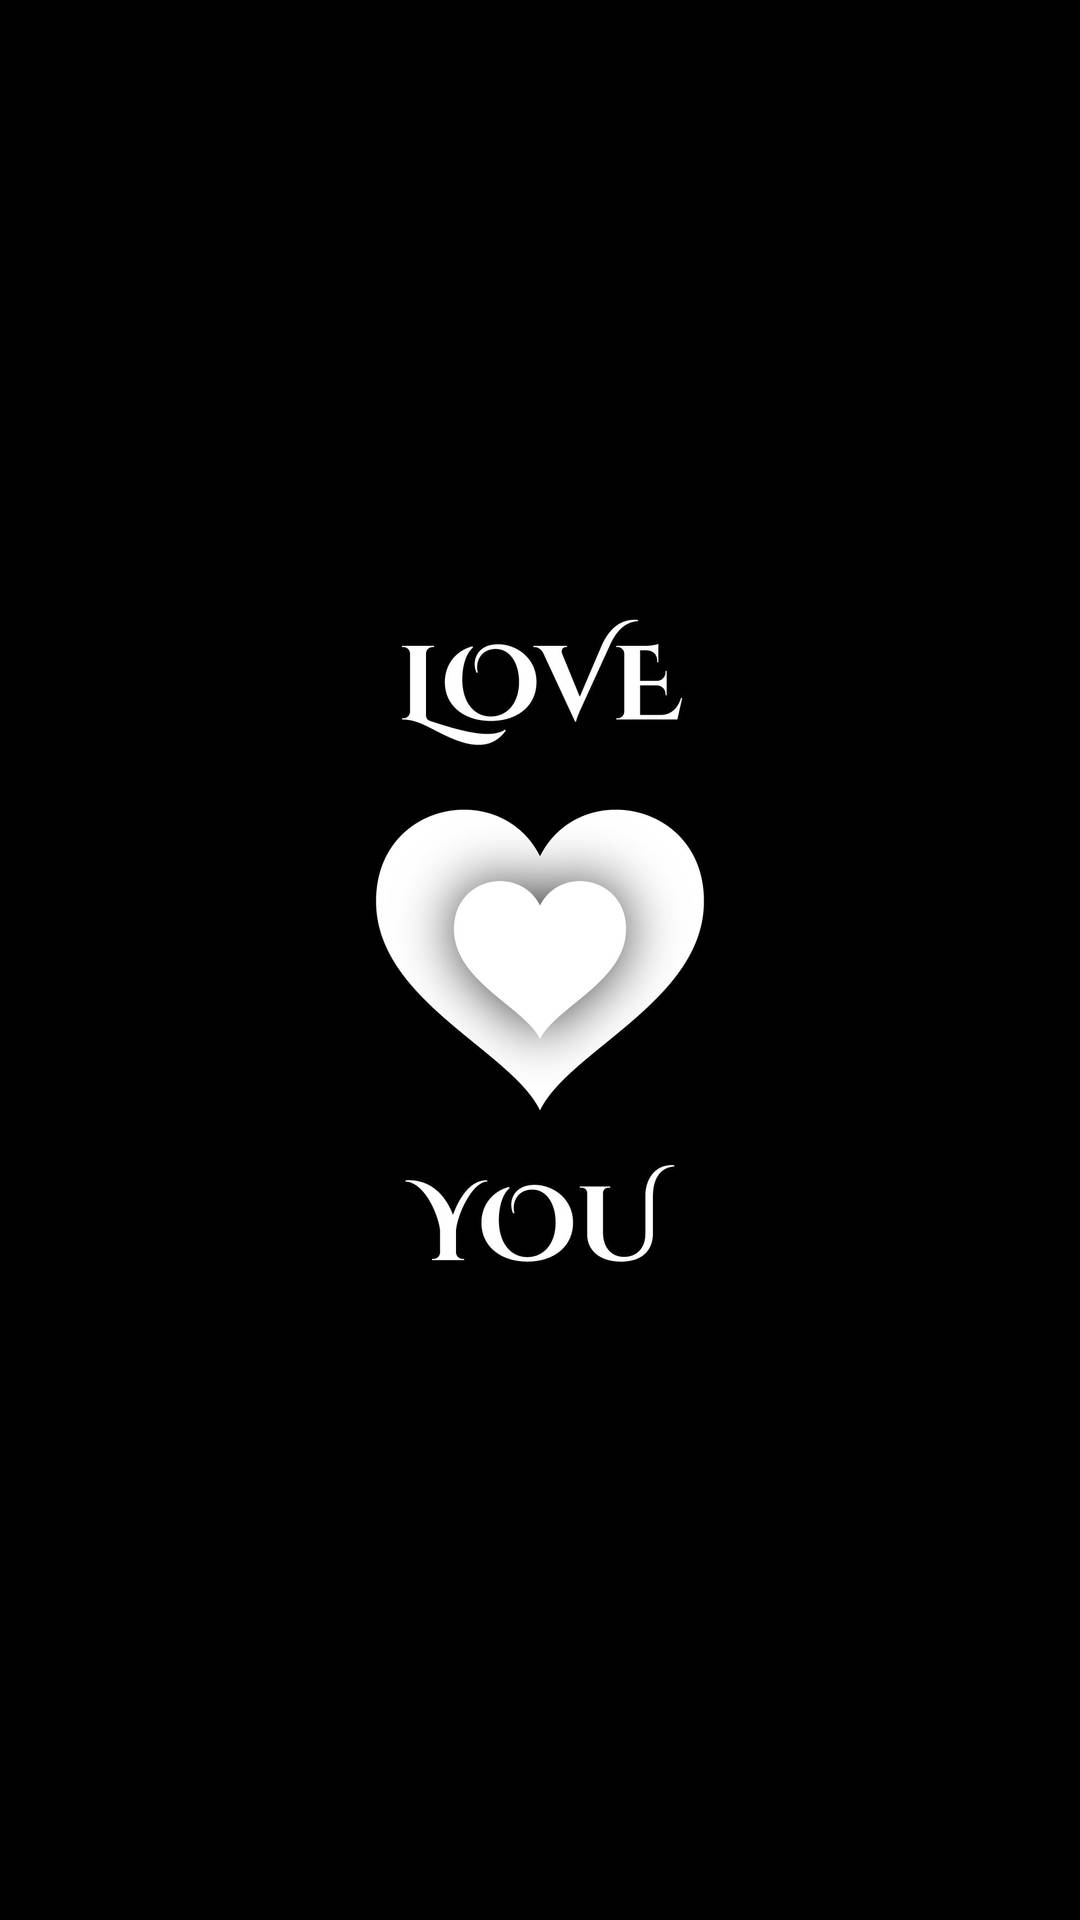 Black And White Heart Love You Wallpaper